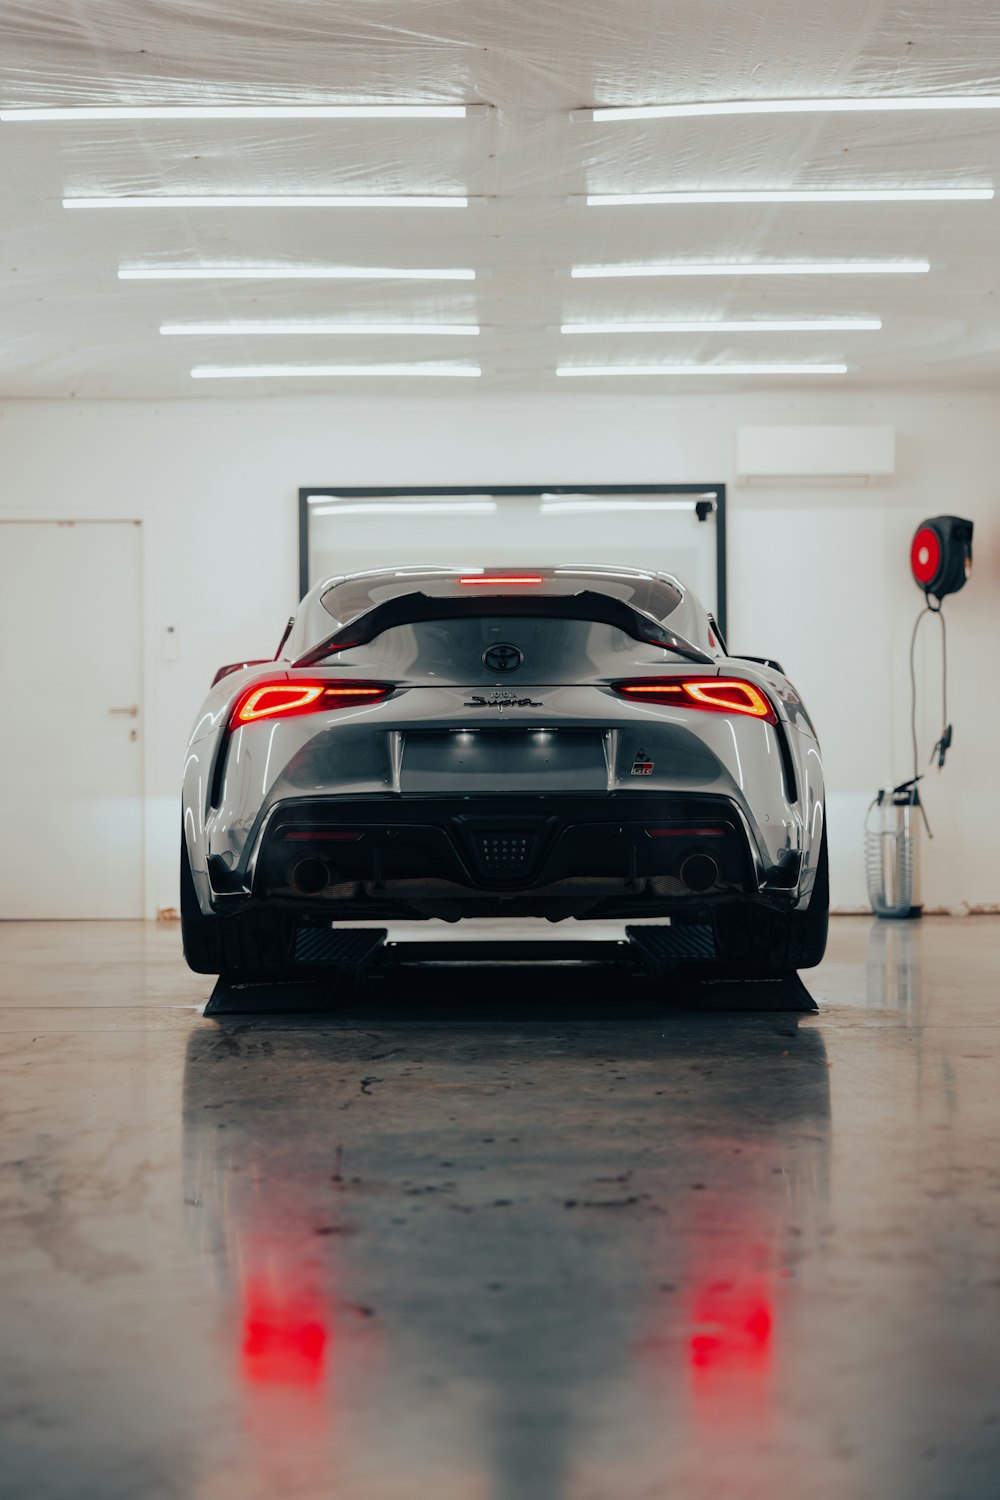 the rear end of a sports car parked in a garage